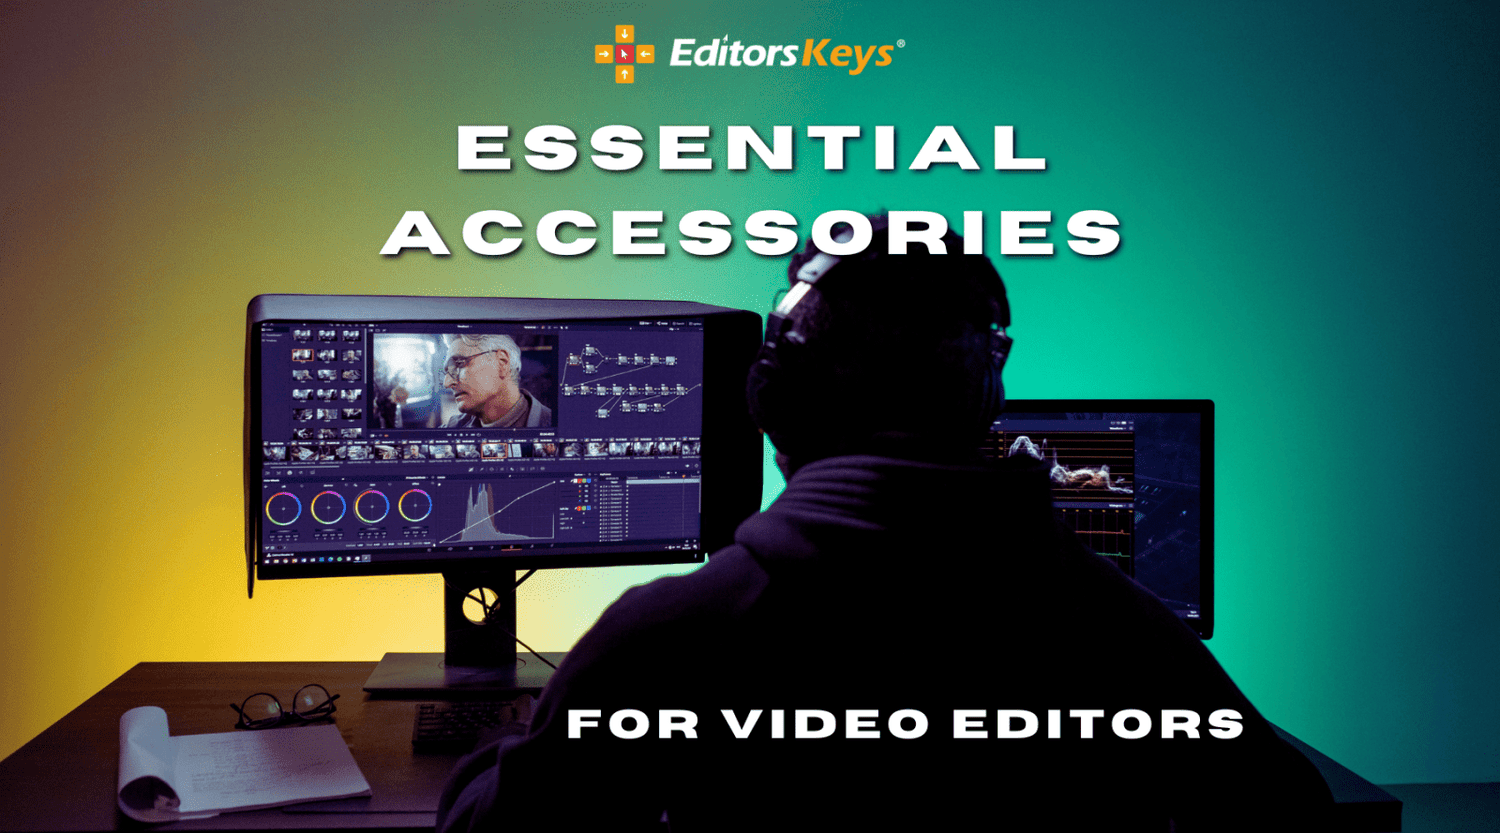 Essential Accessories That Every Video Editor Needs - Editors Keys